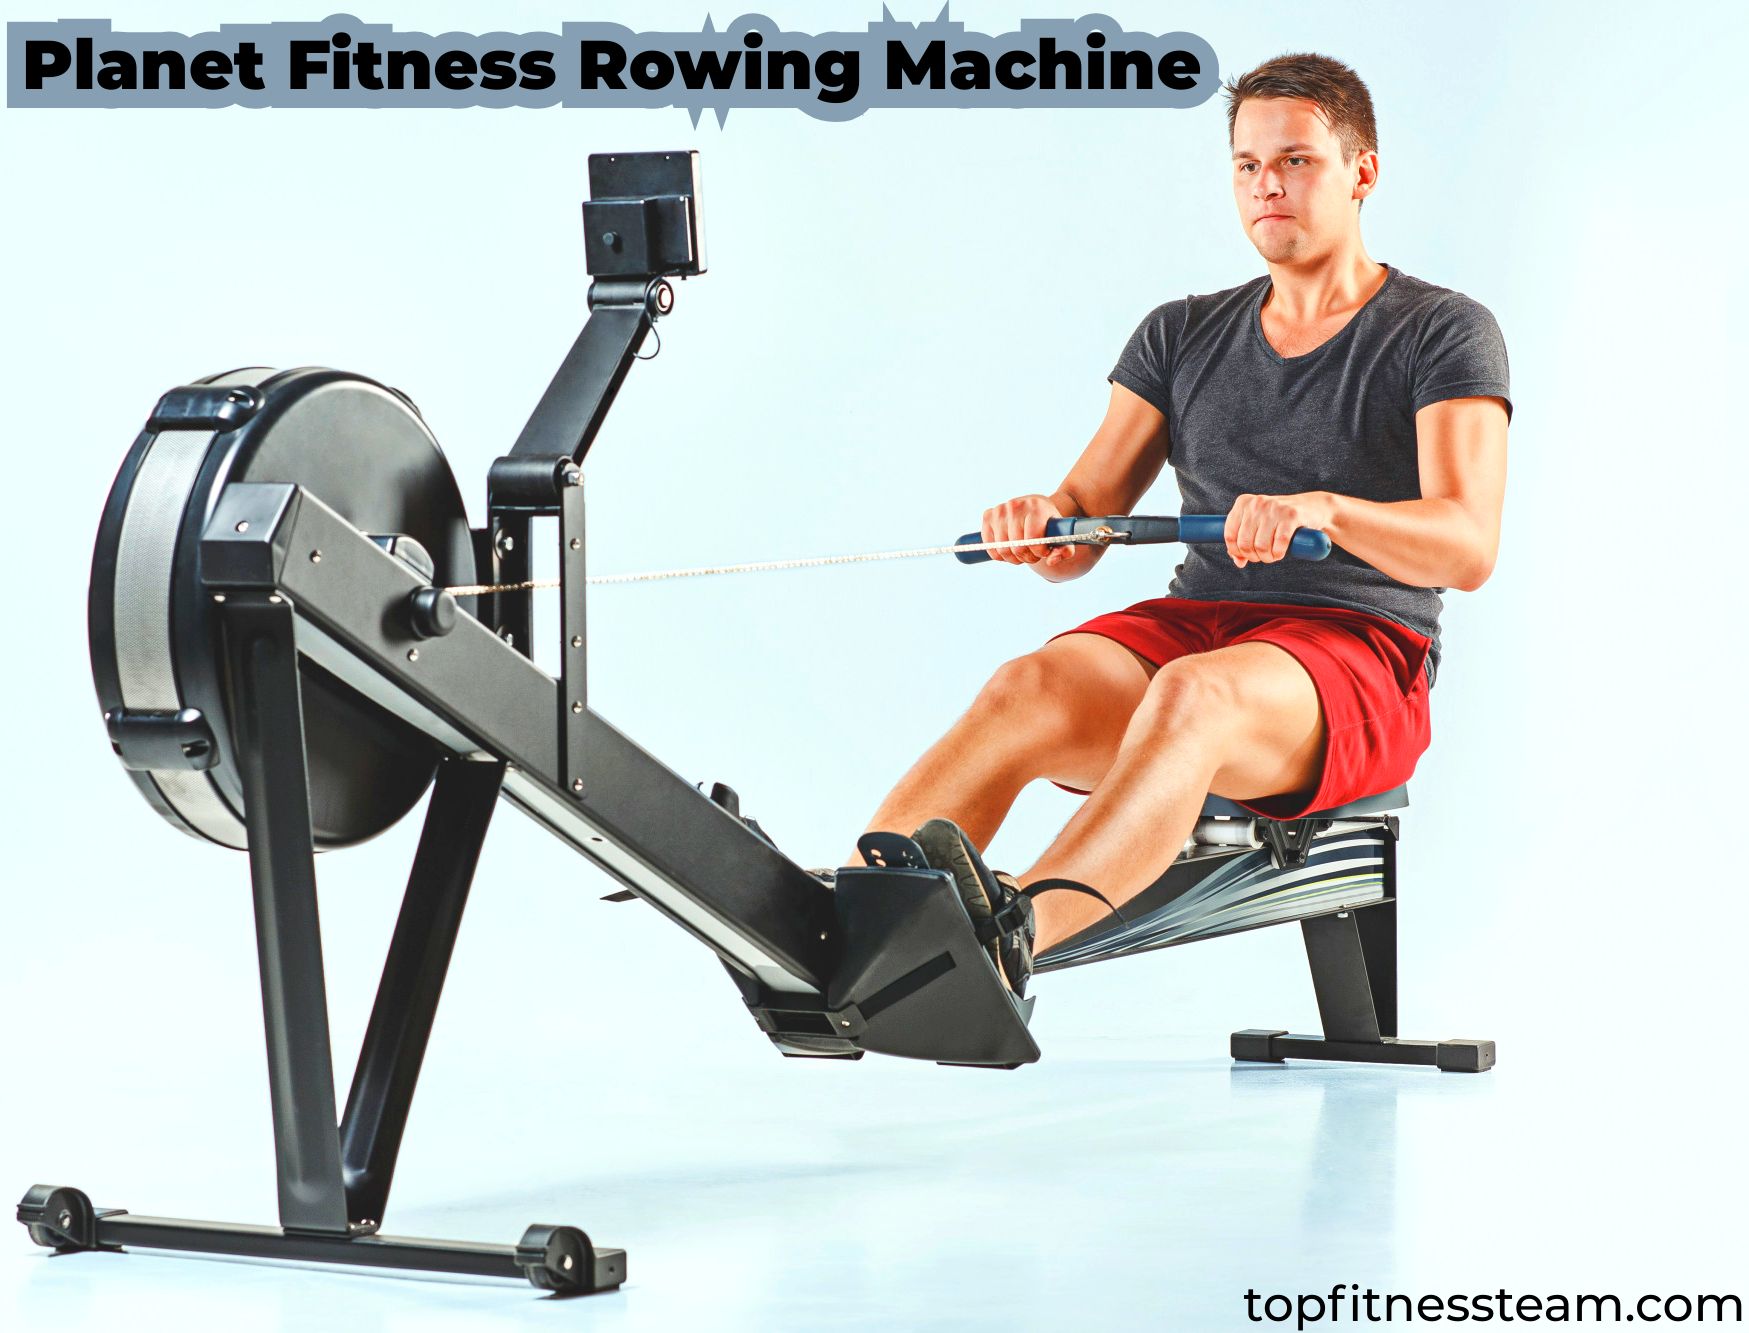 Does Planet Fitness Have Rowing Machines?